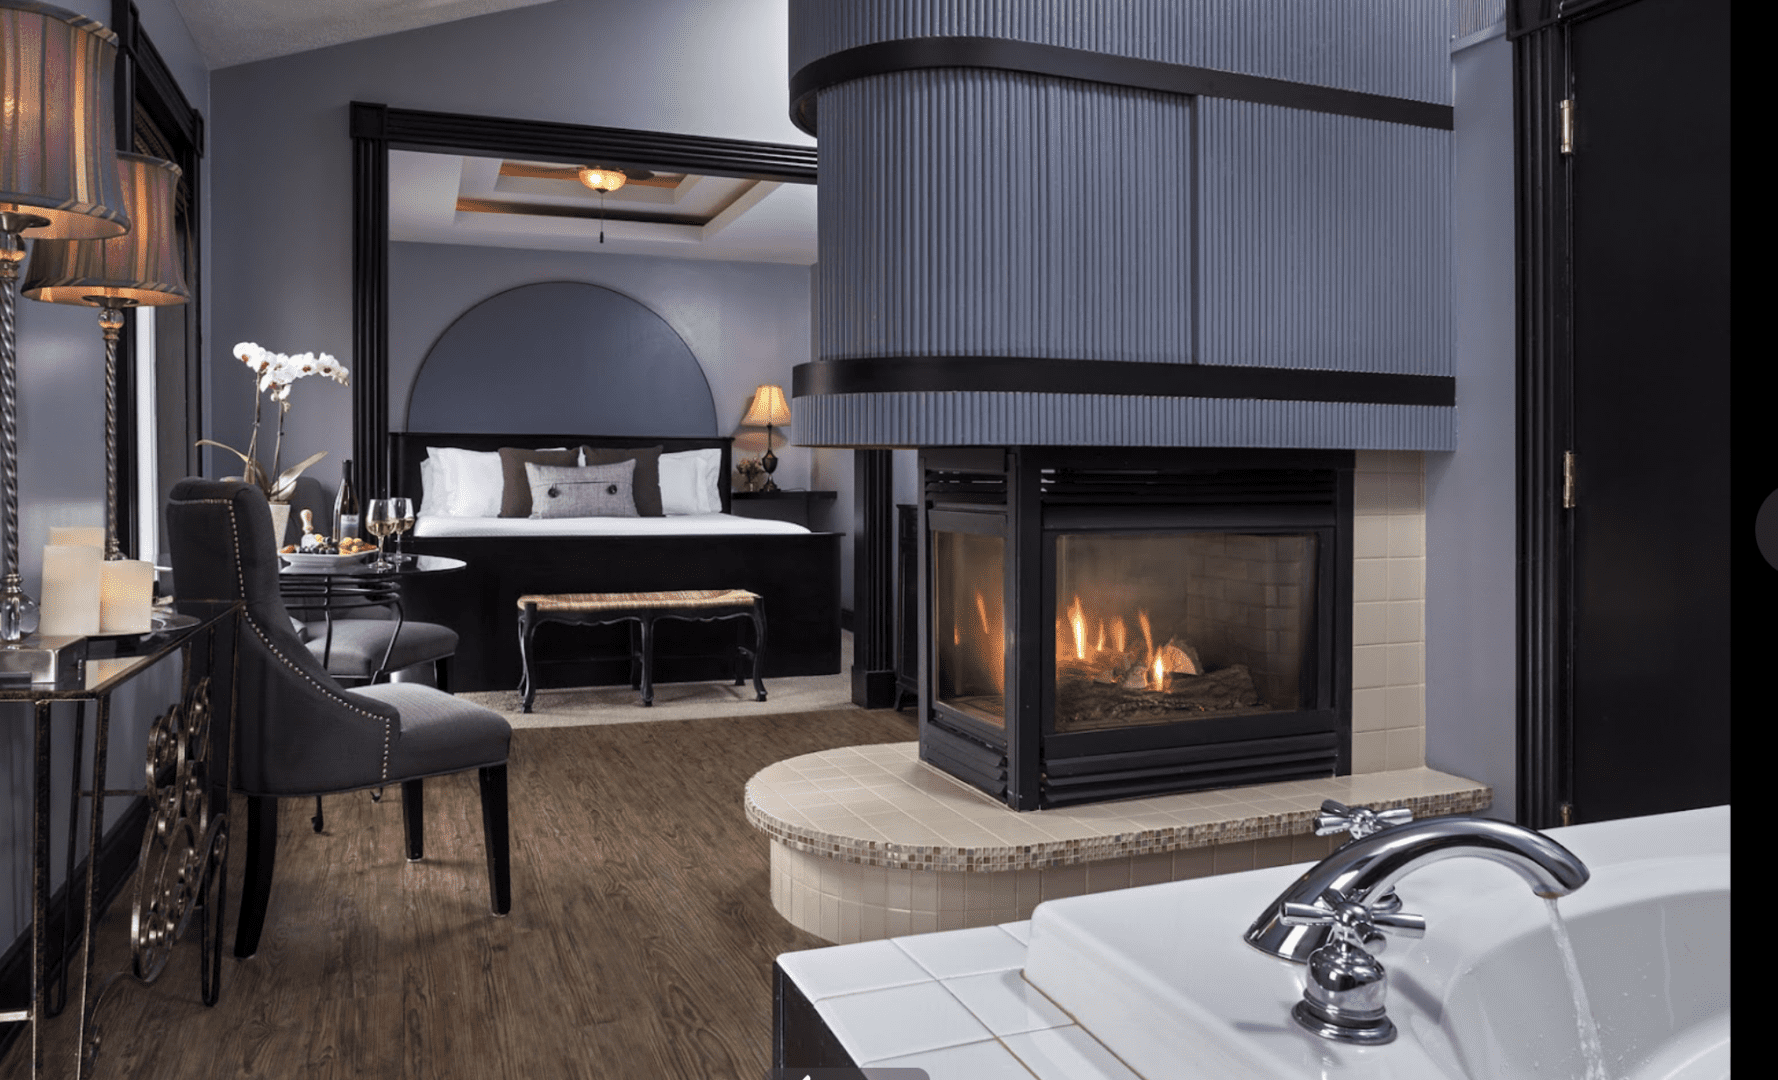 Elegant black bed with a fireplace and whirlpool tub. Lodging at the Castle in the Country